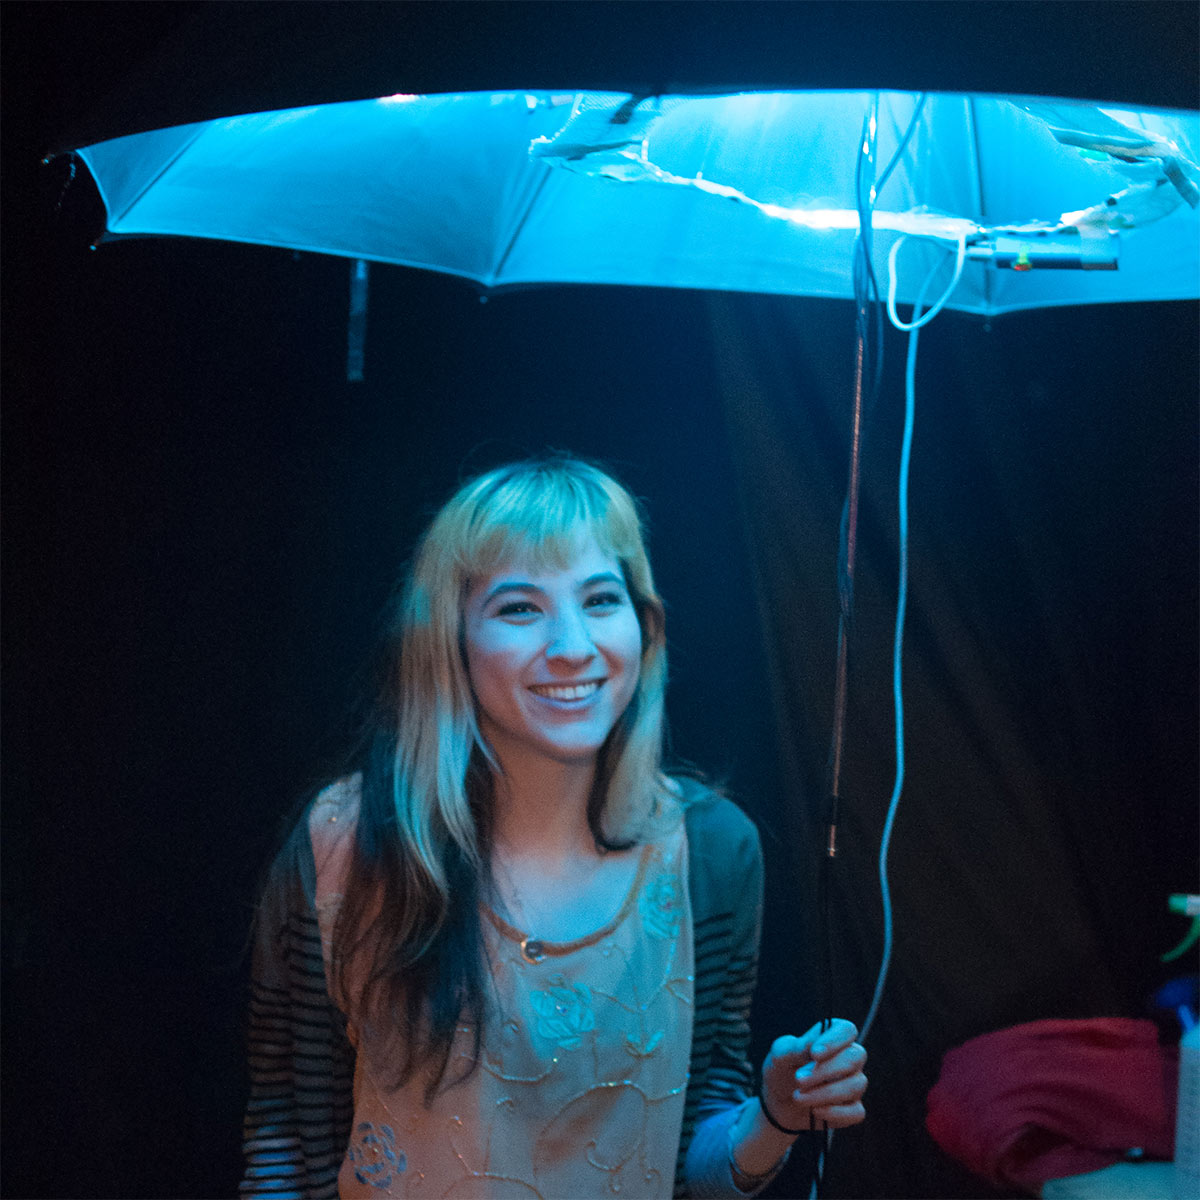 a woman holding an umbrella with lights illuminating it from within